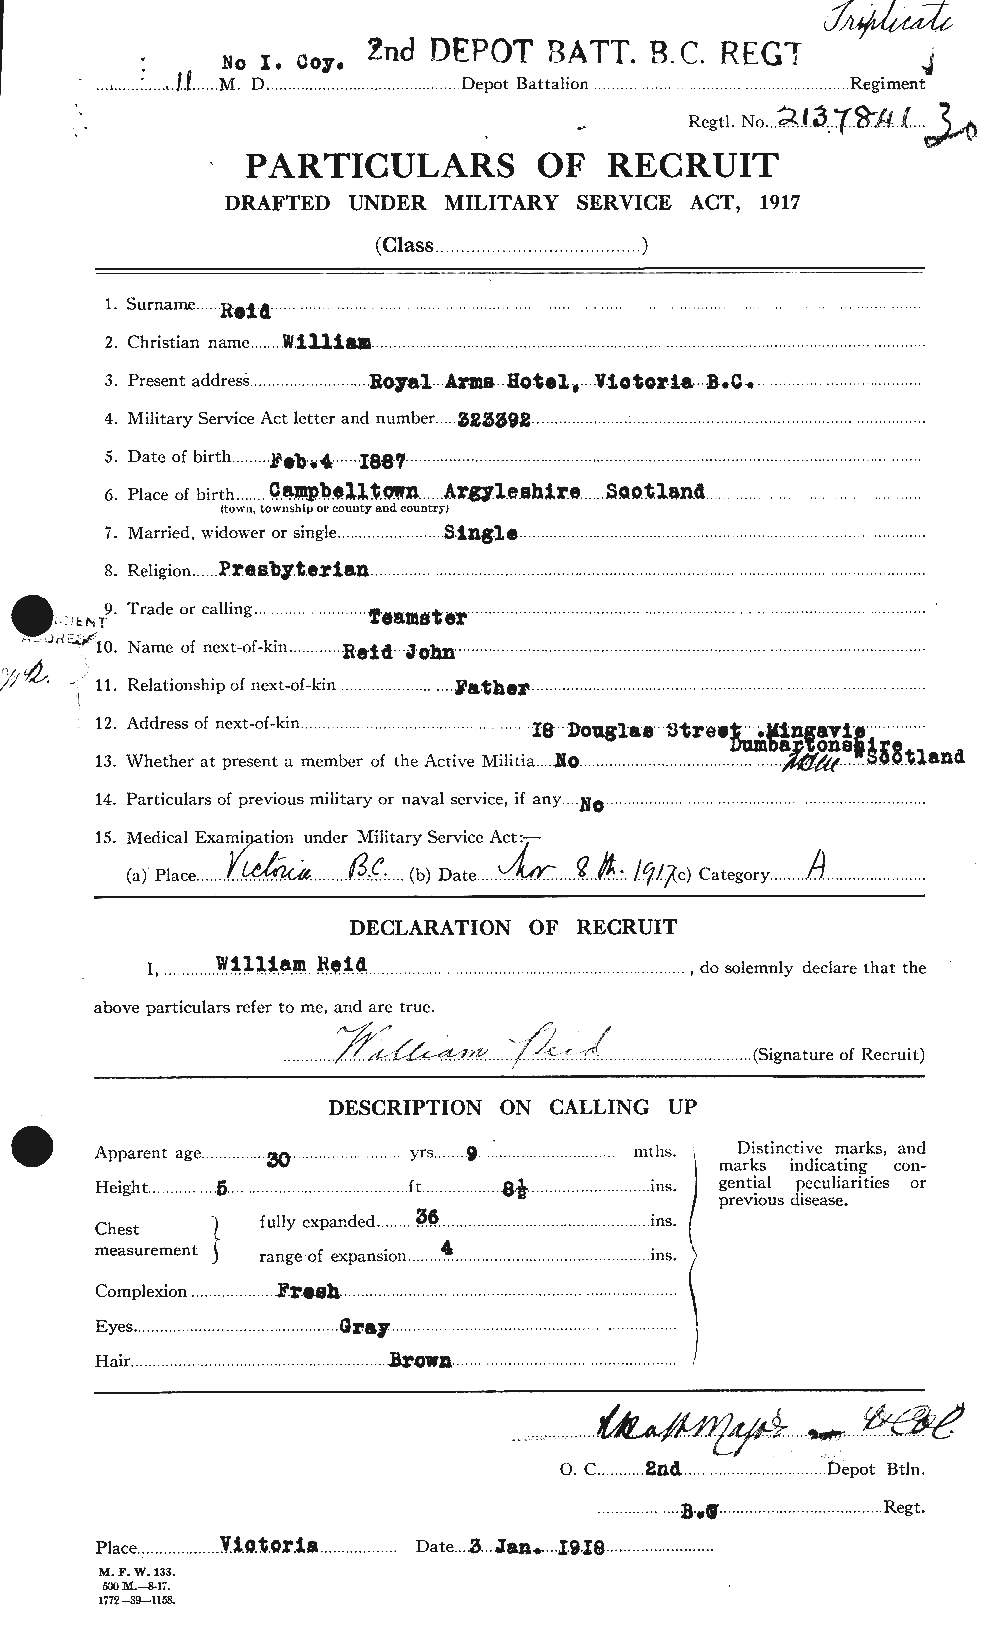 Personnel Records of the First World War - CEF 596911a